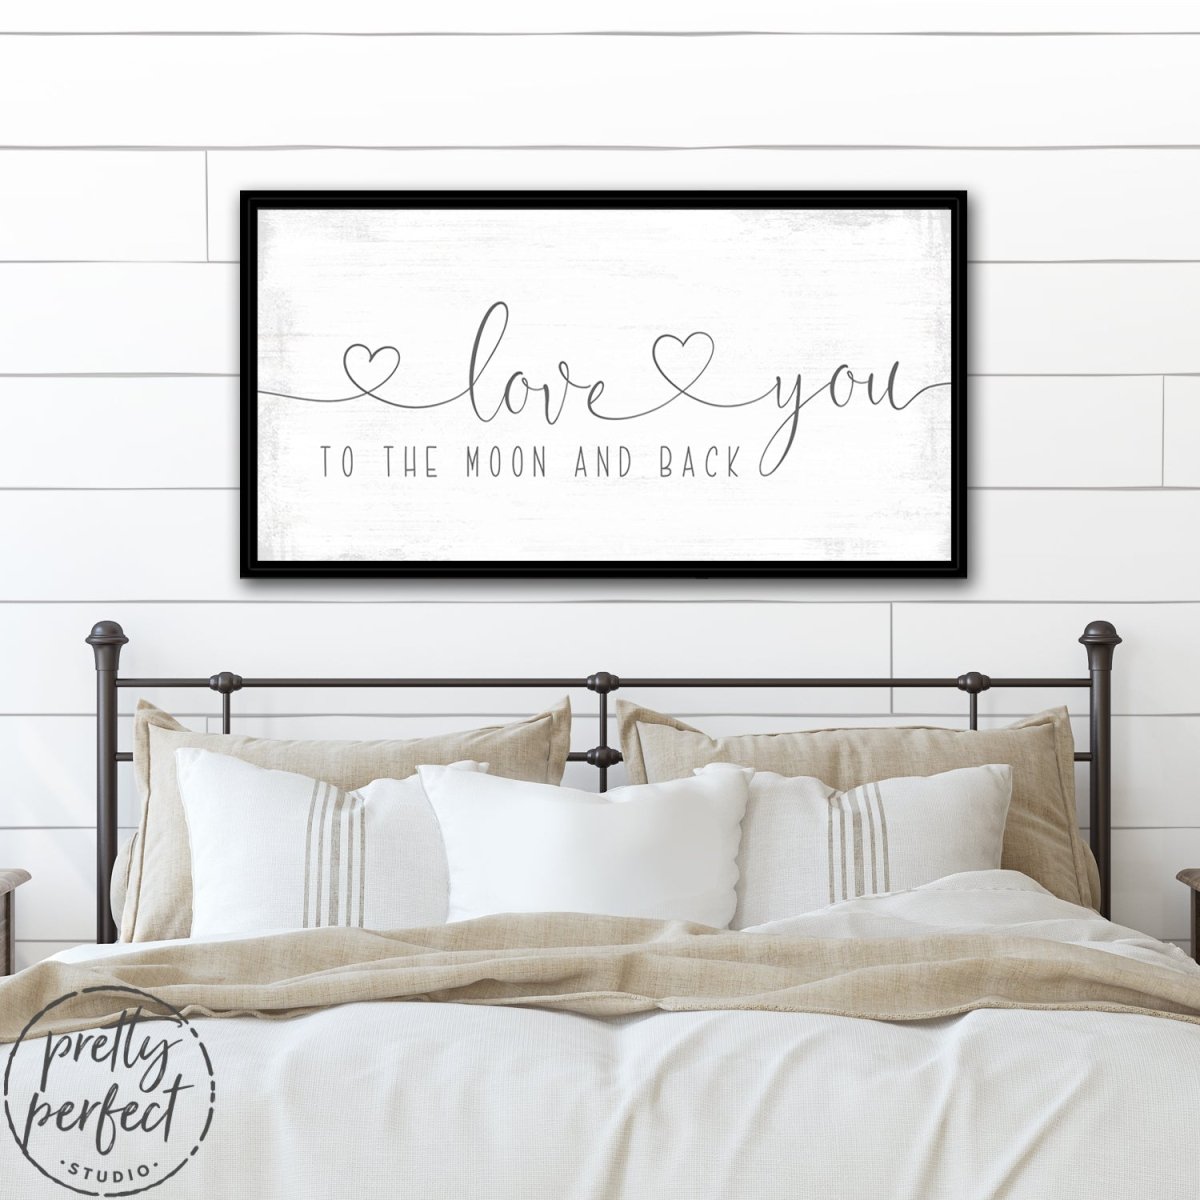 Love You to the Moon and Back Sign With Hearts Above Bed - Pretty Perfect Studio